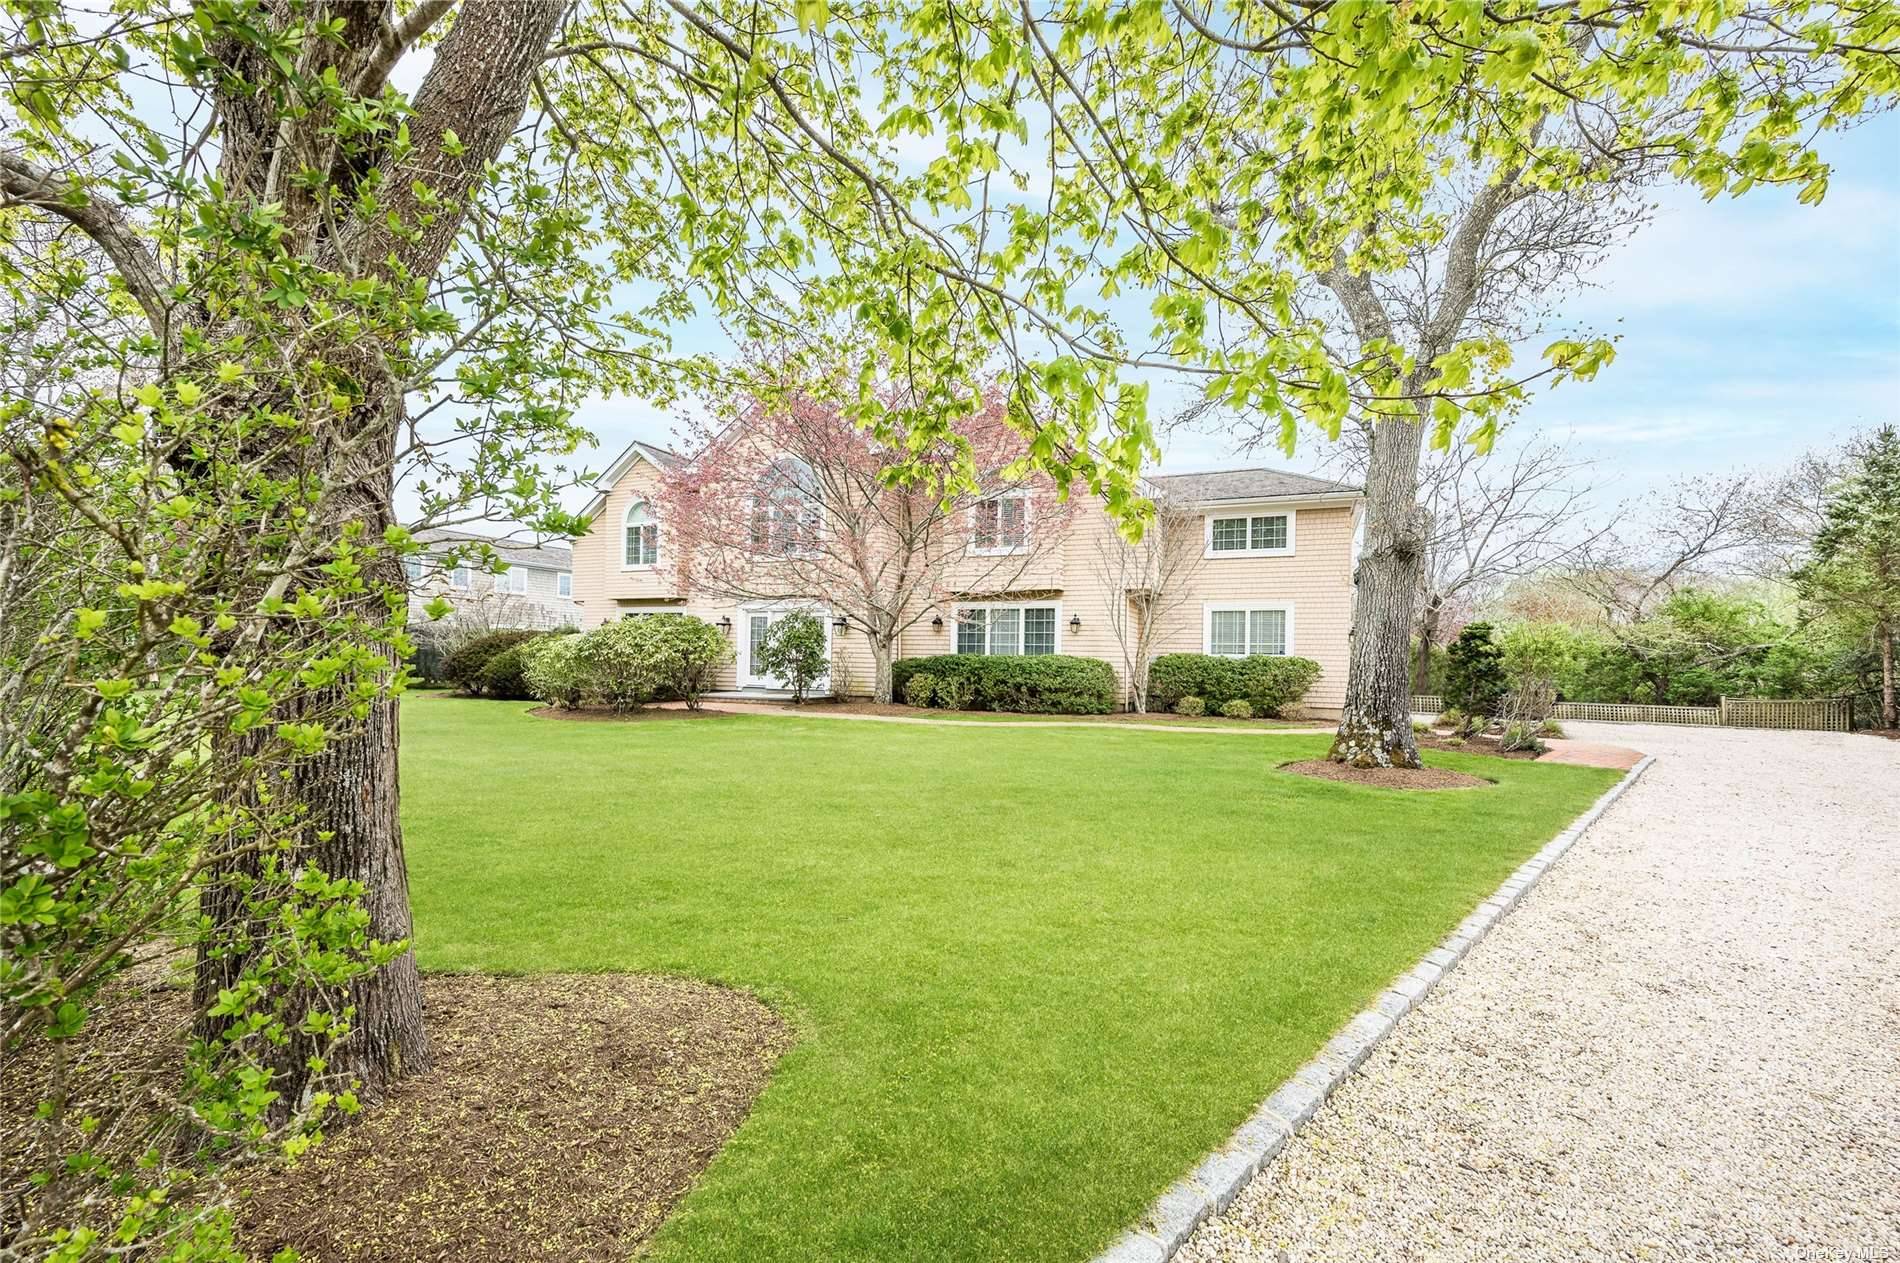 In the heart of Westhampton Village, and tucked in highly coveted Snug Harbor, is your Hampton's dream home.